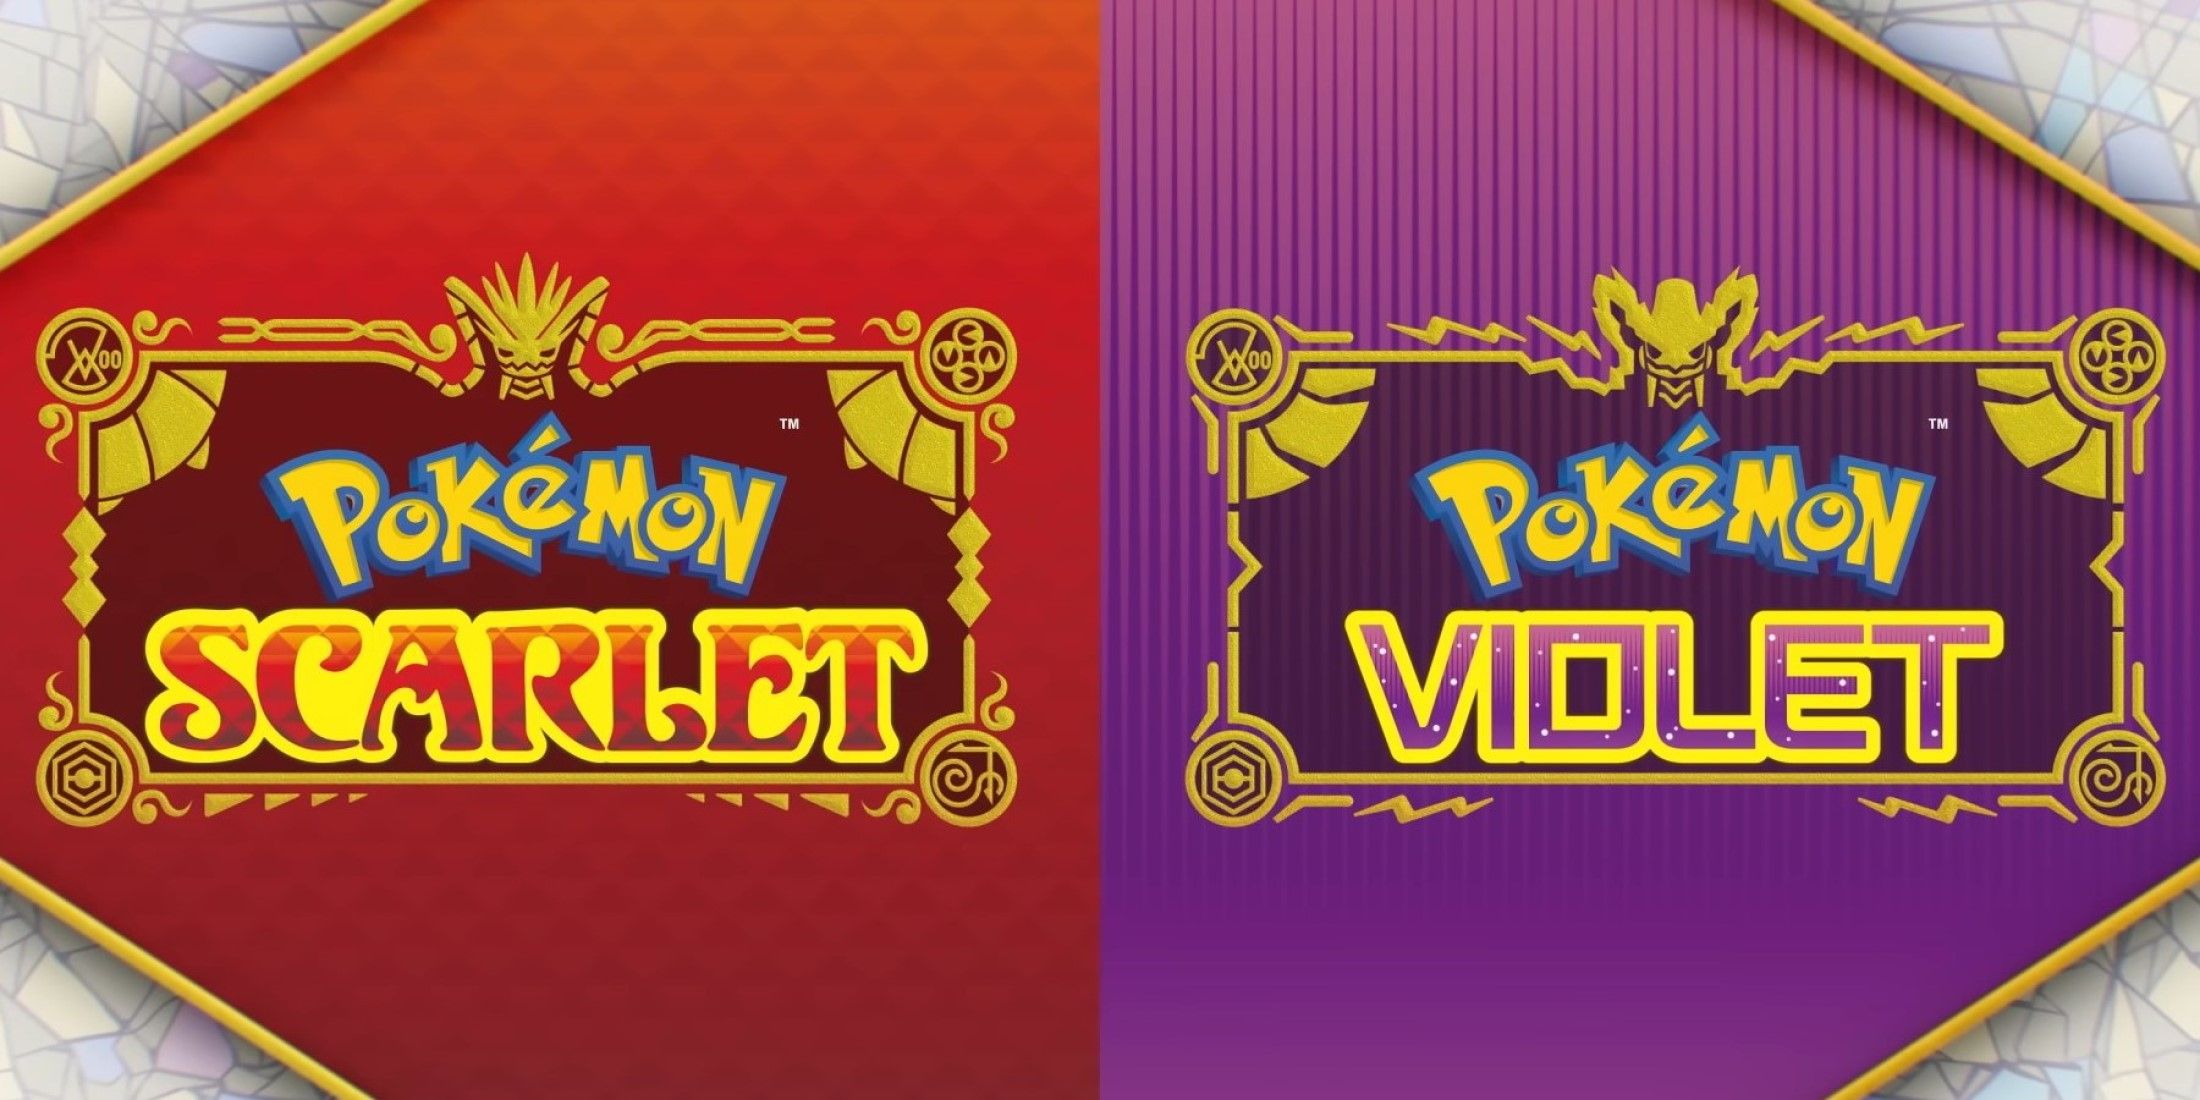 pokemon-scarlet-and-violet-logos-colored-backgrounds-red-purple